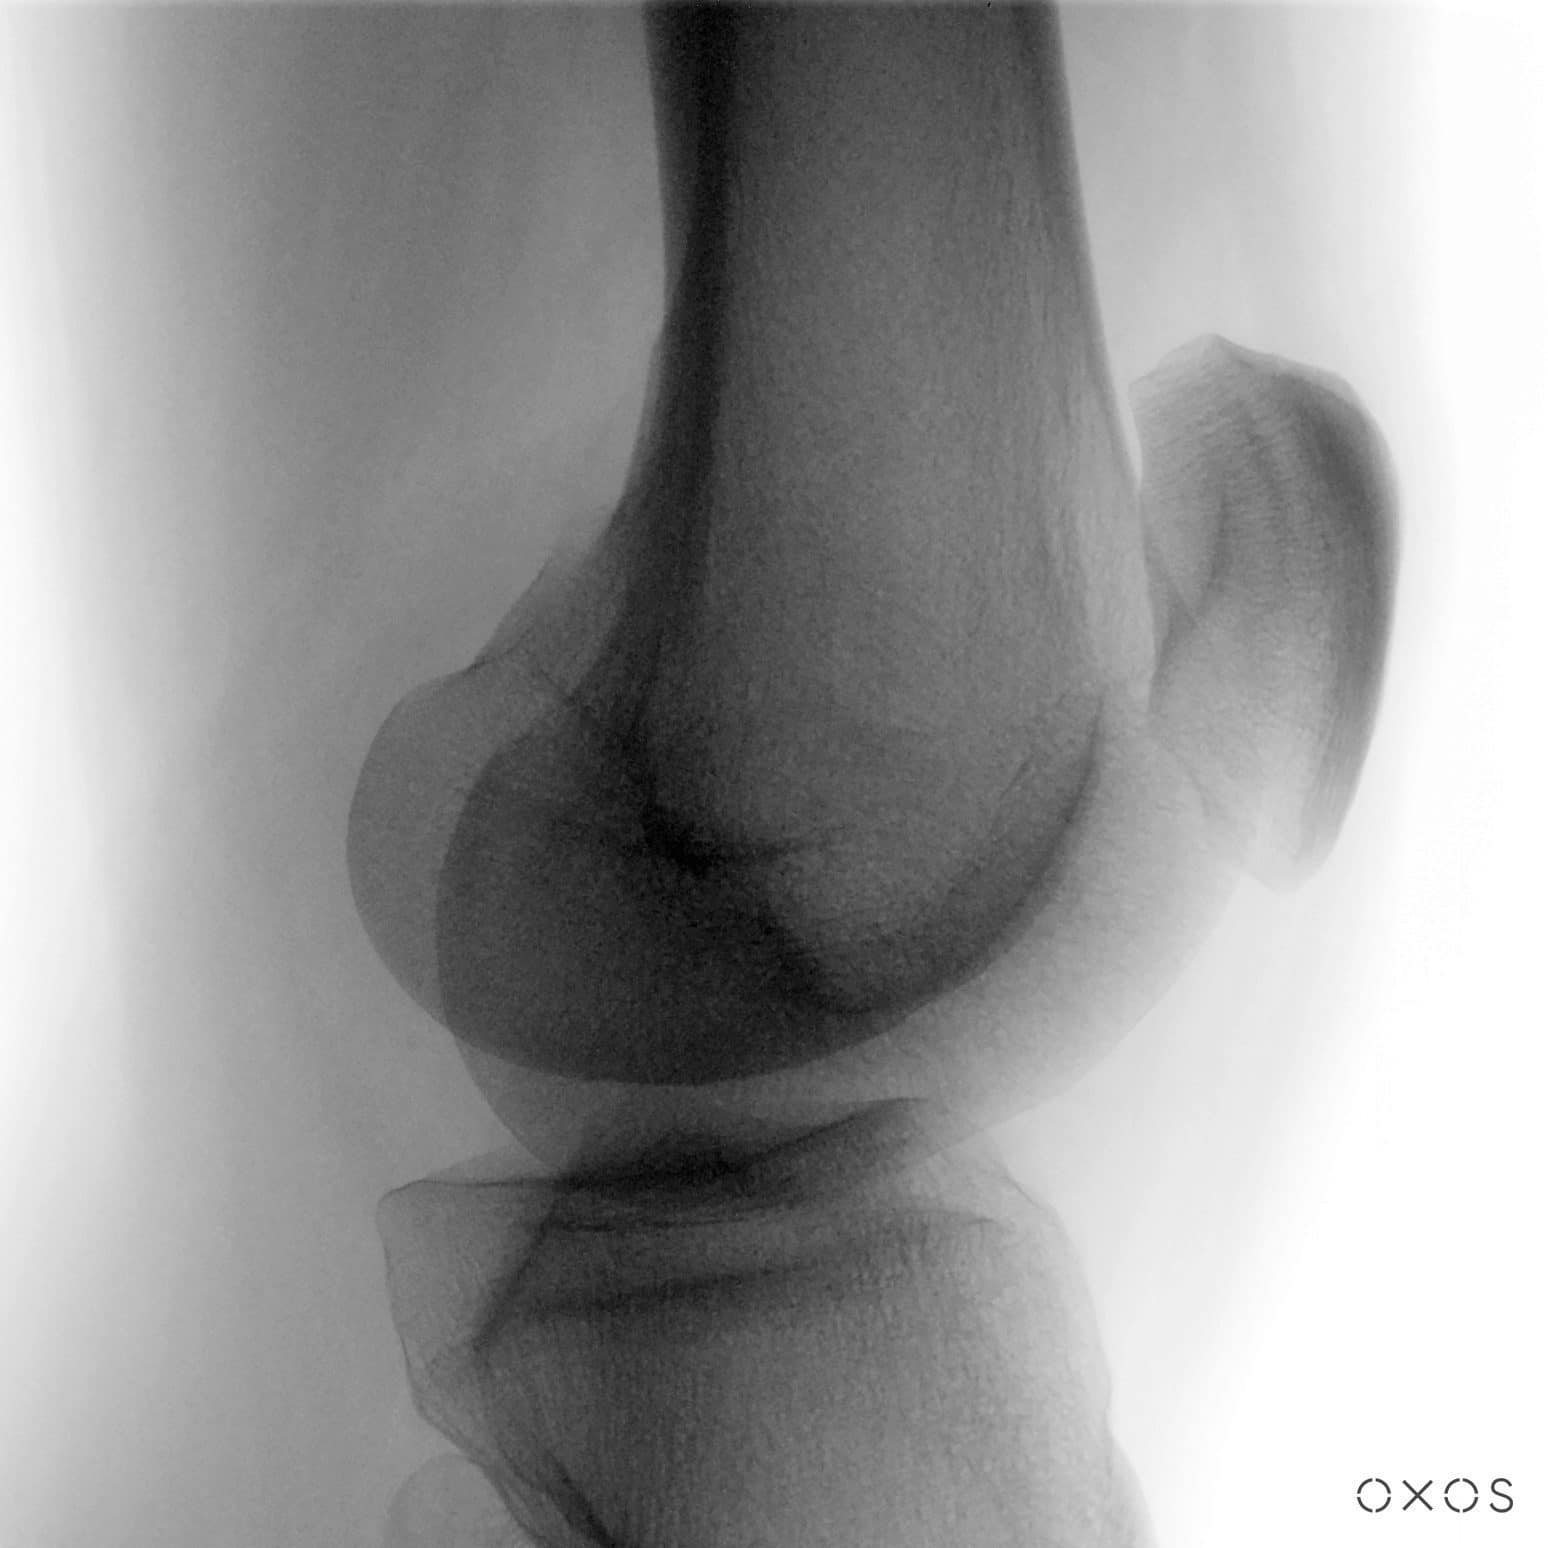 Knee Lateral, 23.4 µGy